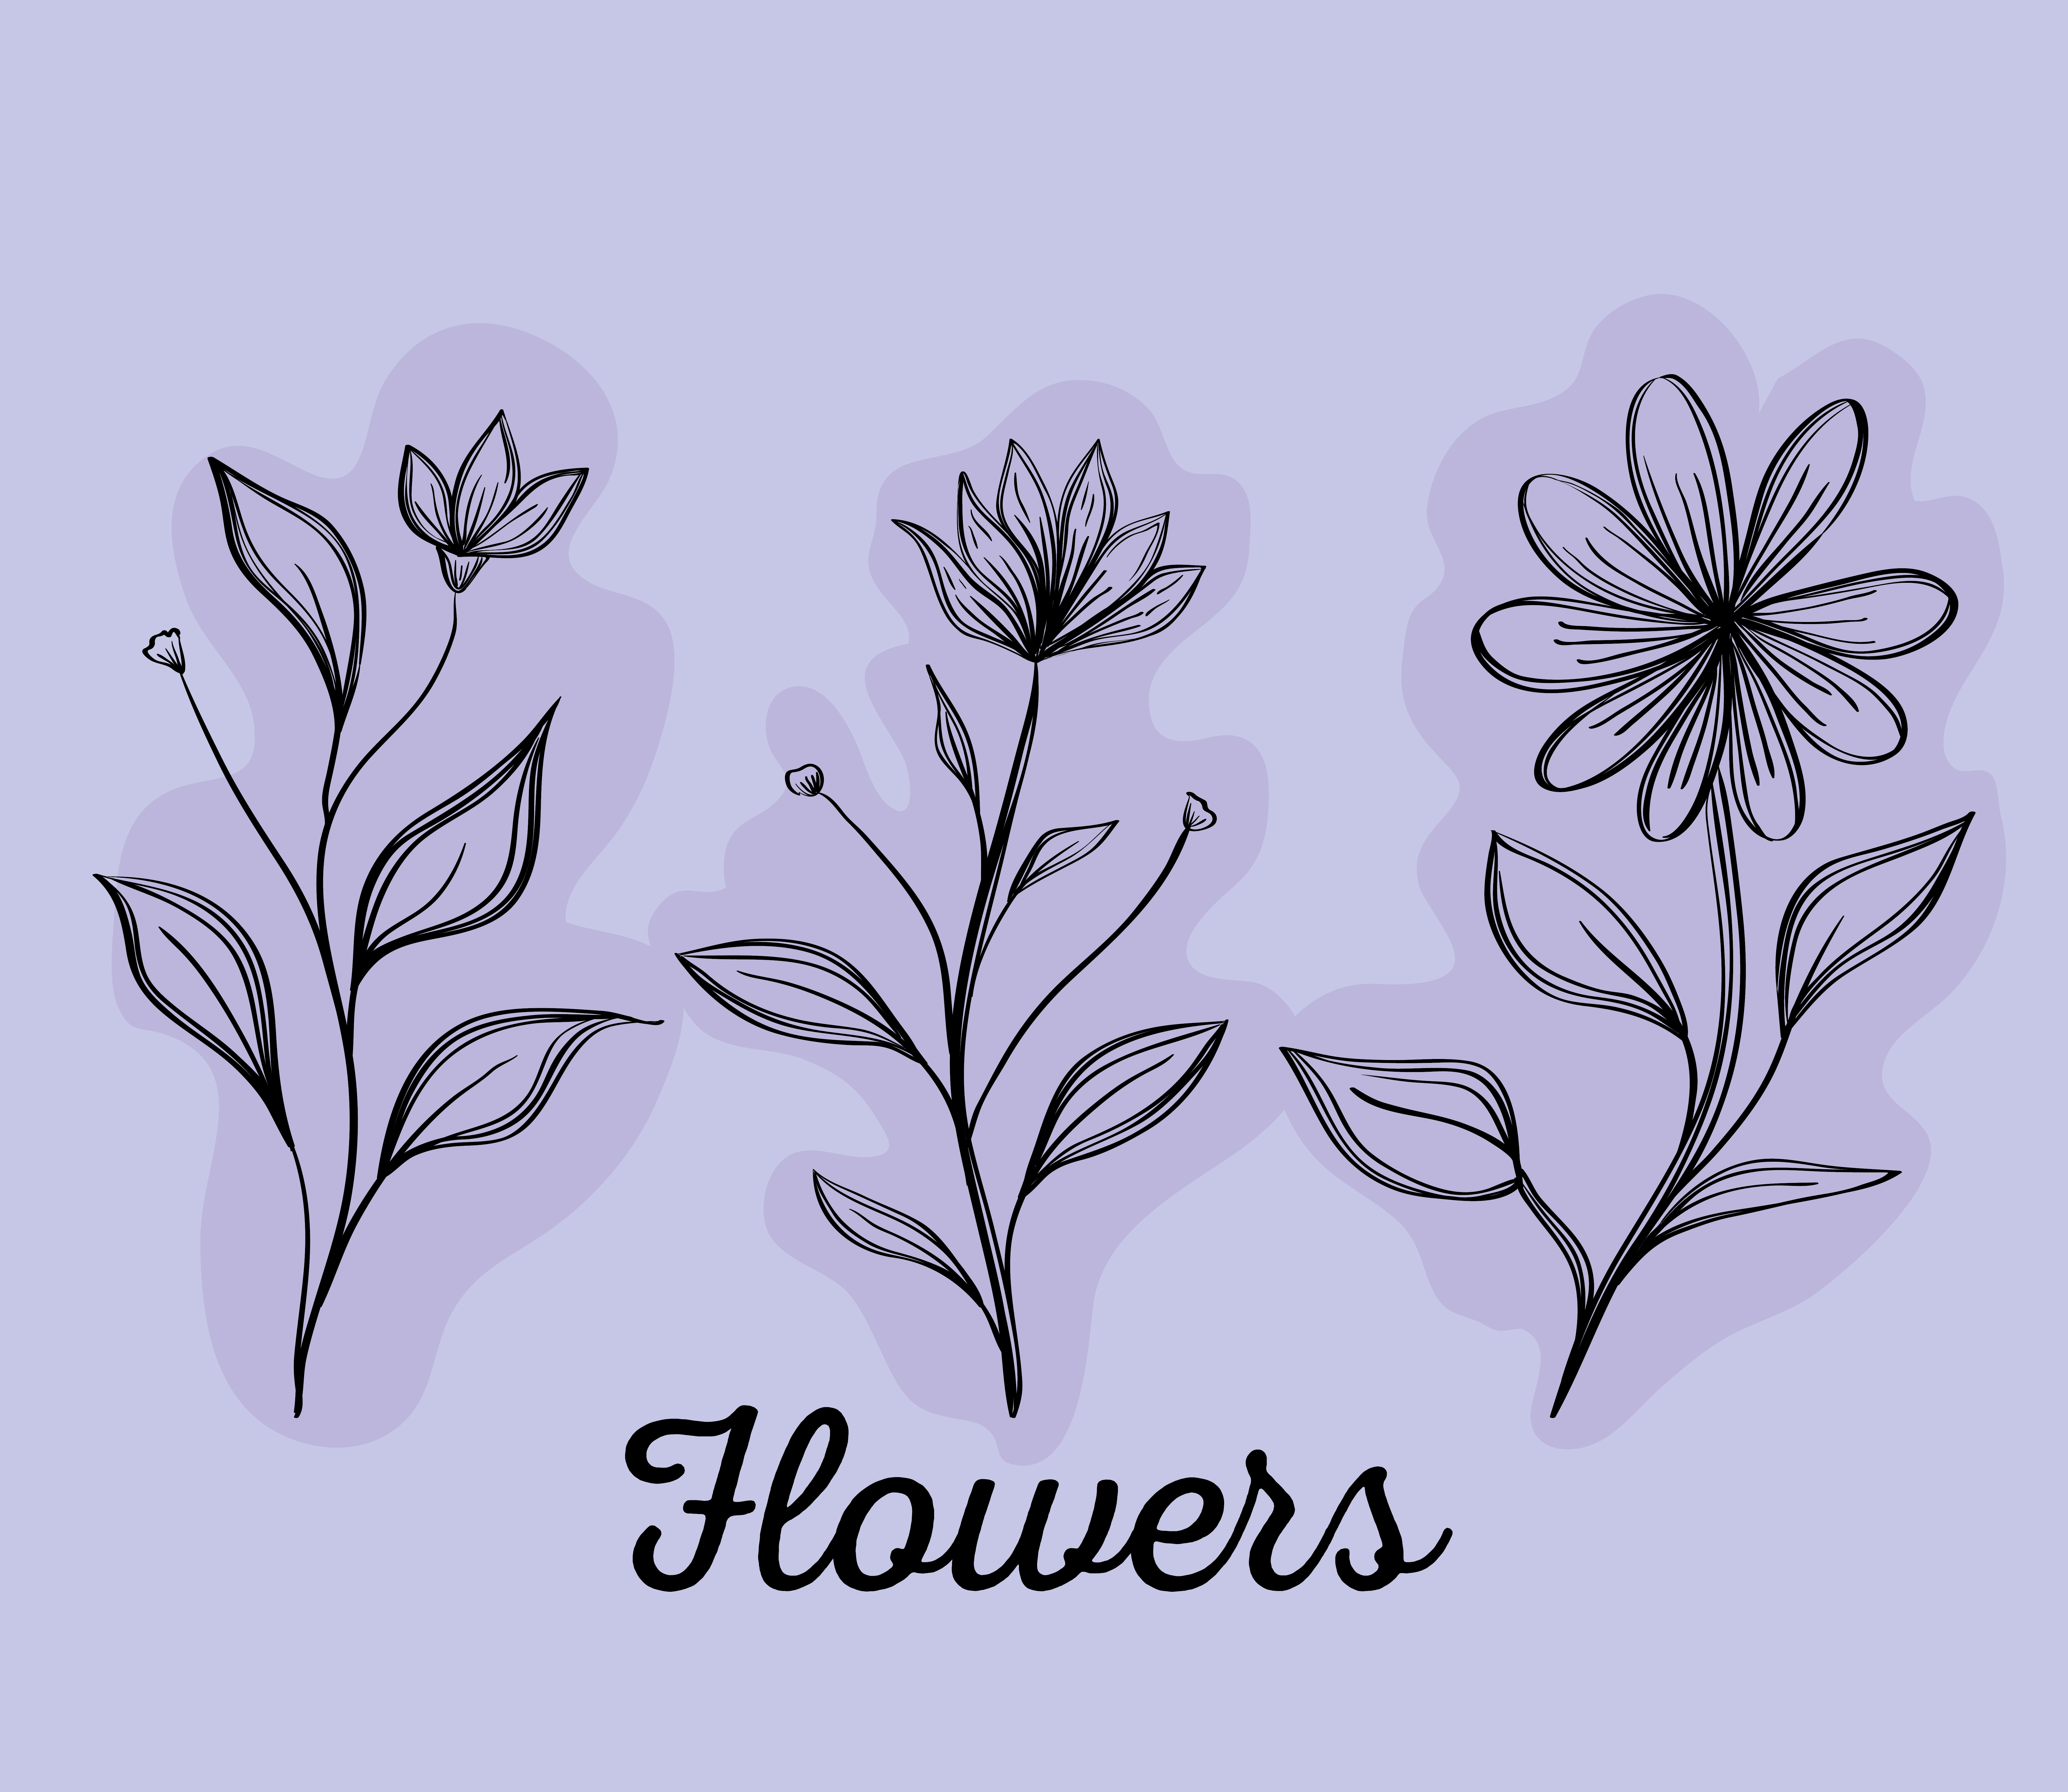 https://static.vecteezy.com/system/resources/previews/002/495/335/original/bundle-of-three-flowers-drawing-nature-ecology-vector.jpg